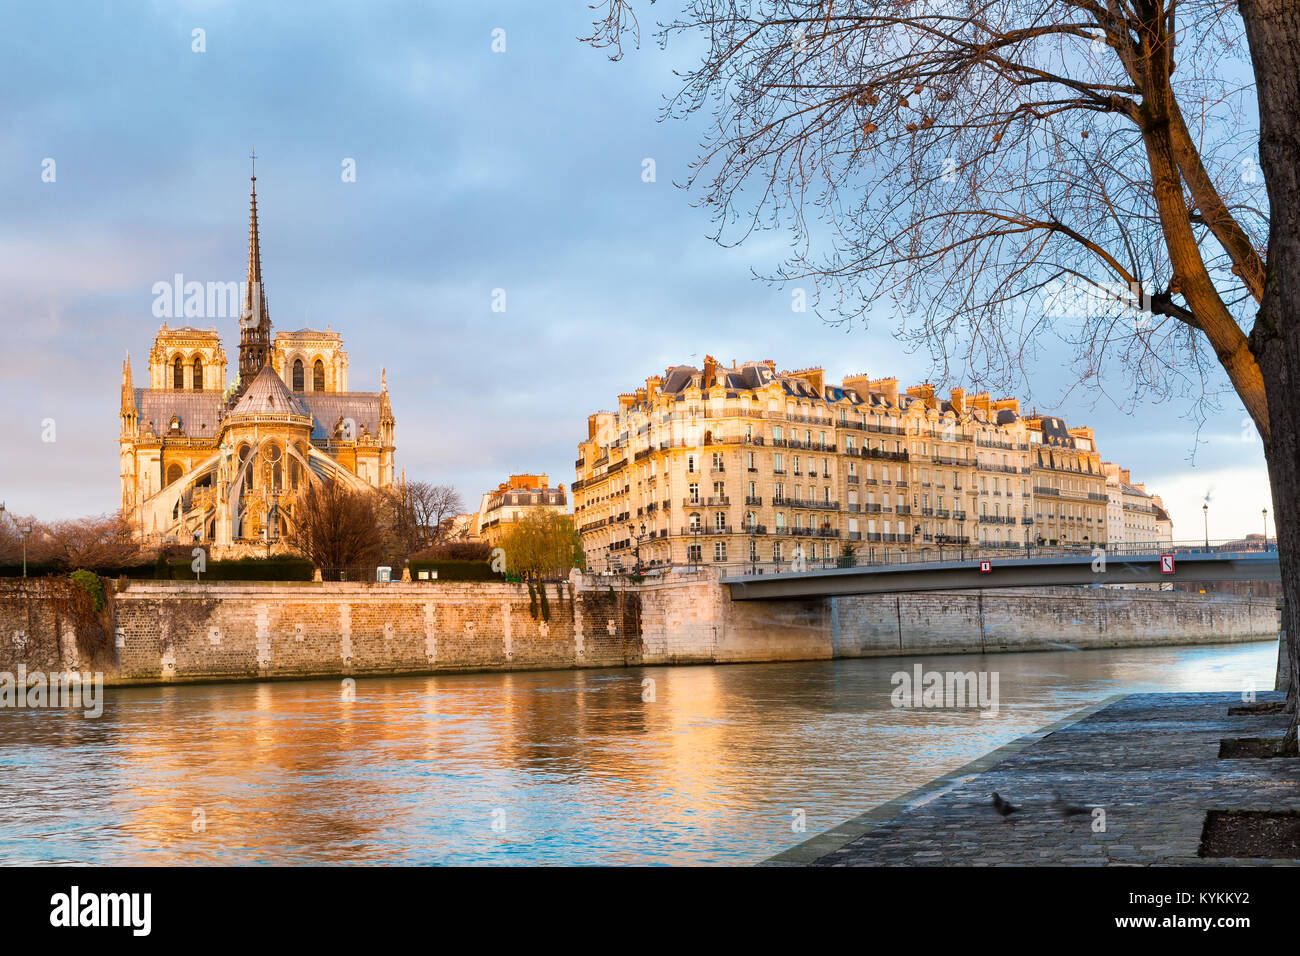 Paris Notre Dame cathedral golden in early morning sunlight. Reflections in the Seine River in the foreground. Wide view. Stock Photo